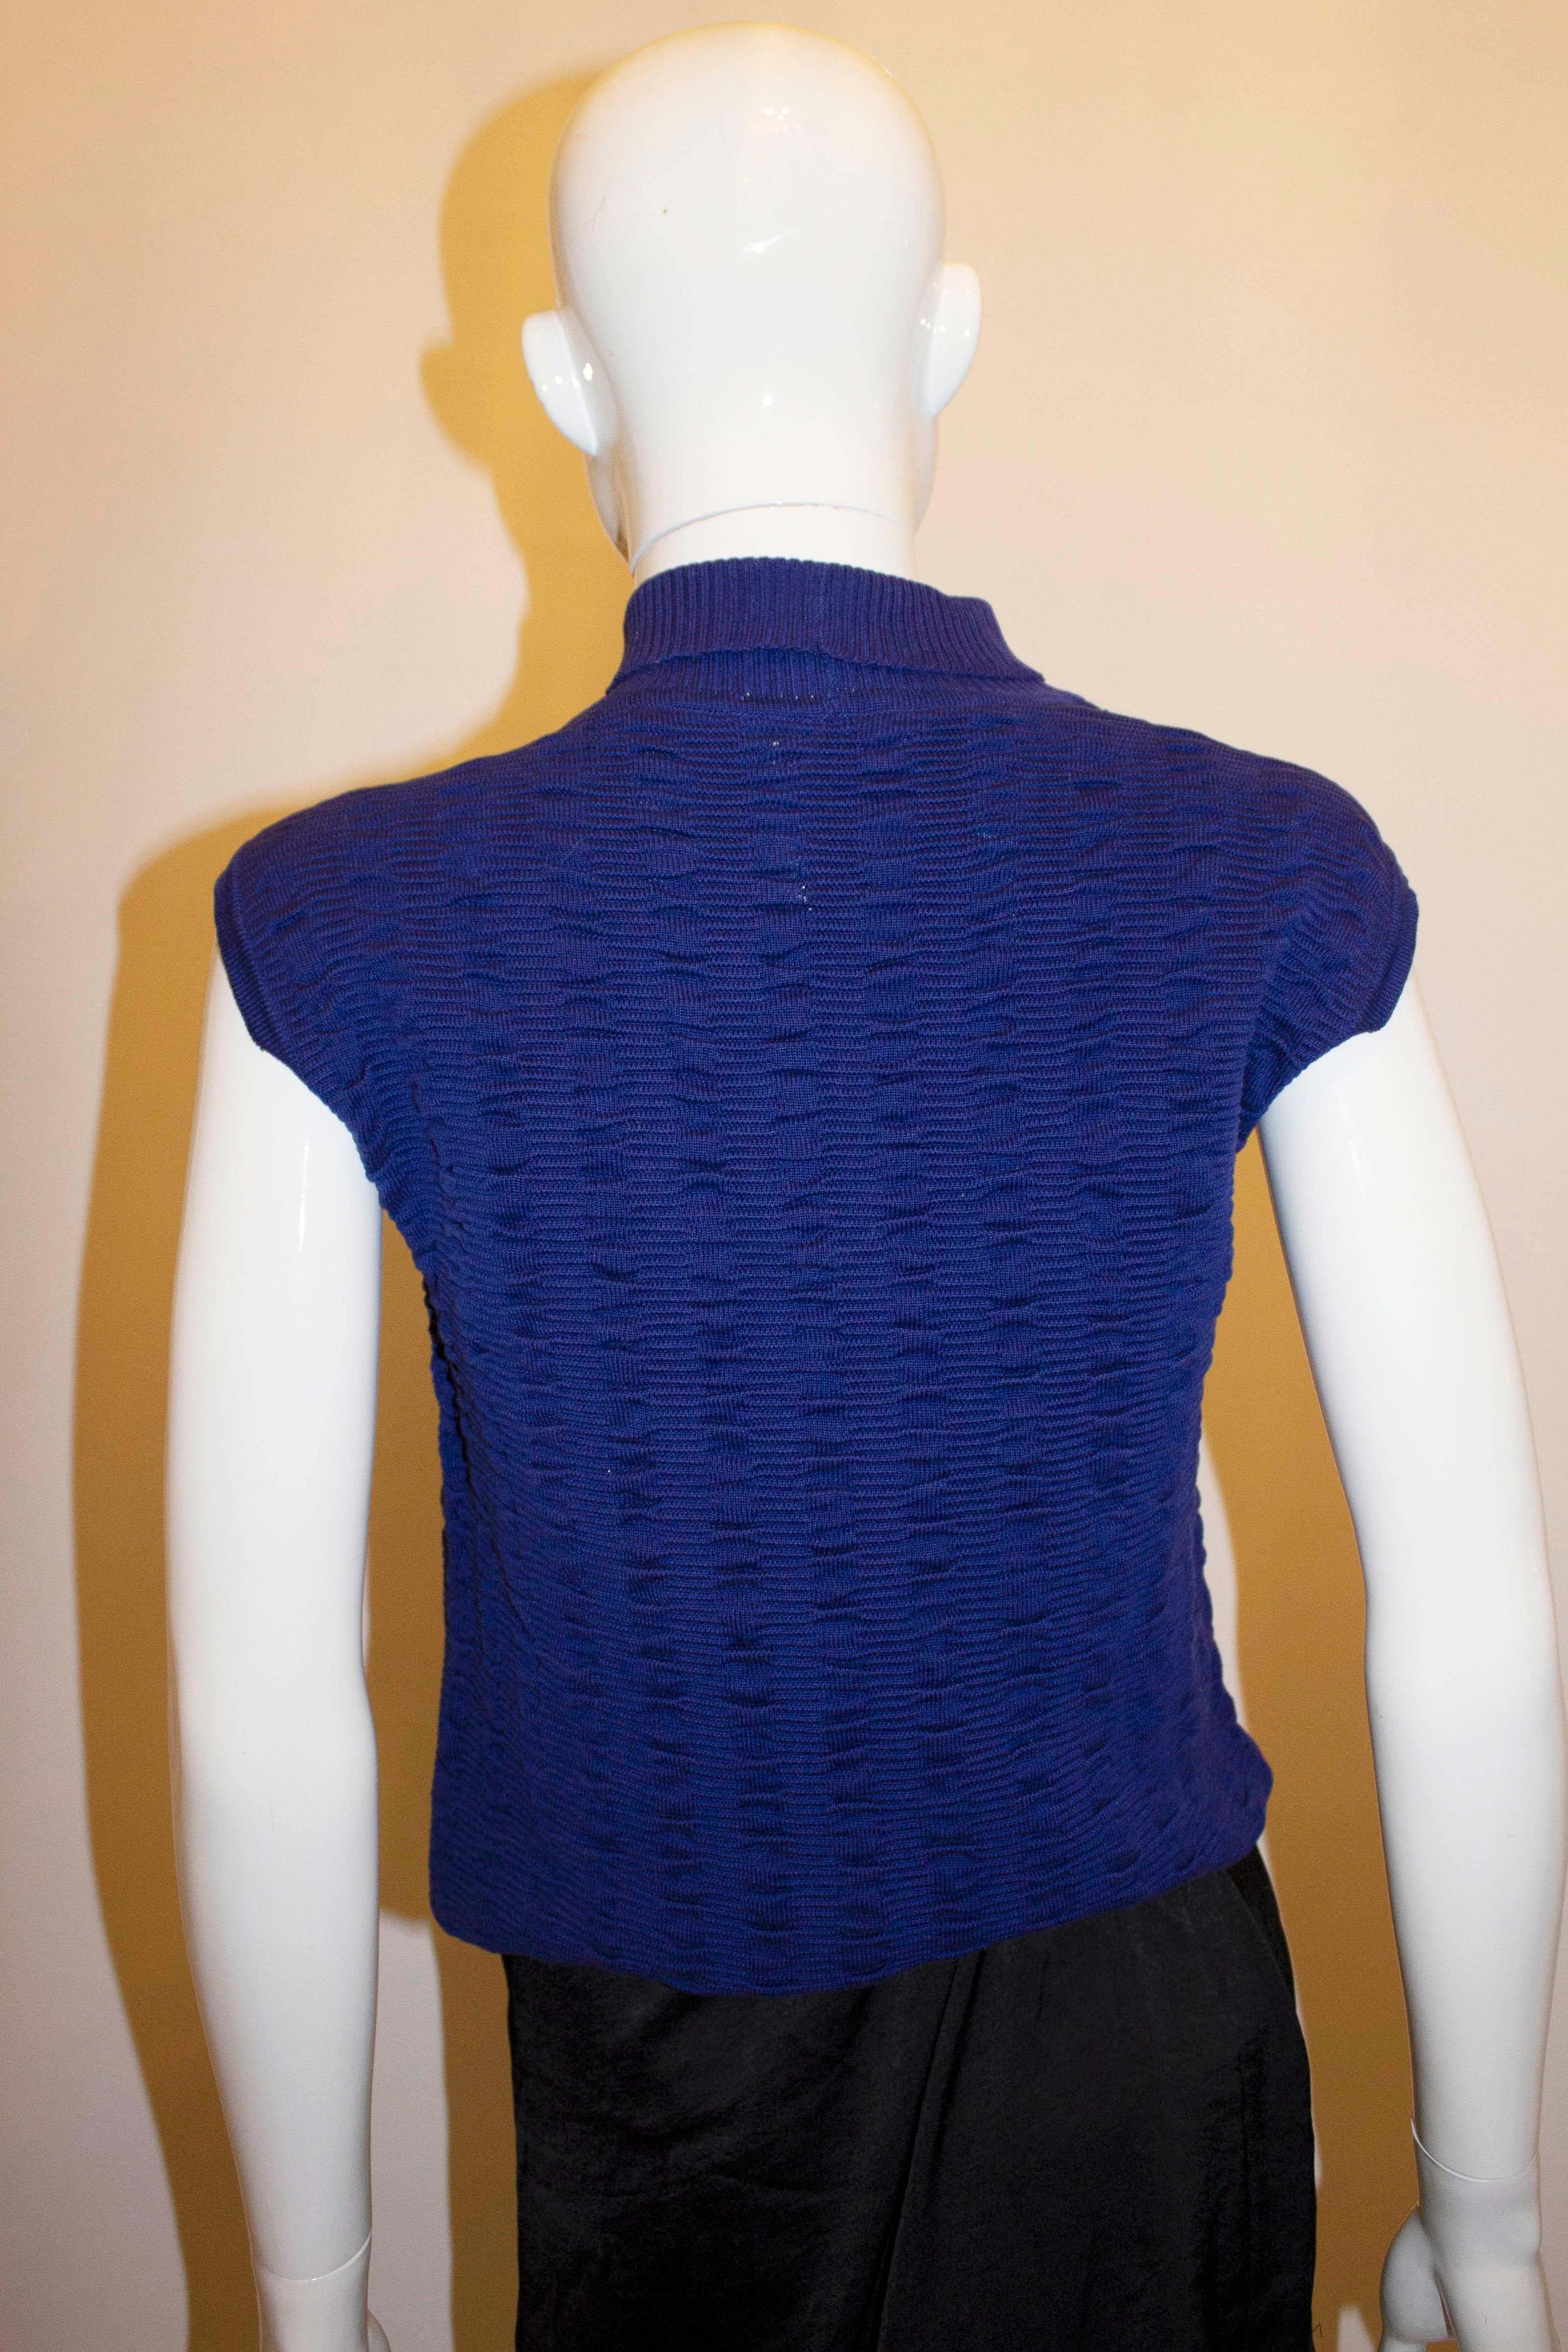 A chic knitted top by Italian firm Filo Scozia. The top has an interesting knit with a  turtle kneck line  and ribbed detail. Measurements: Bust 37'', length 20''